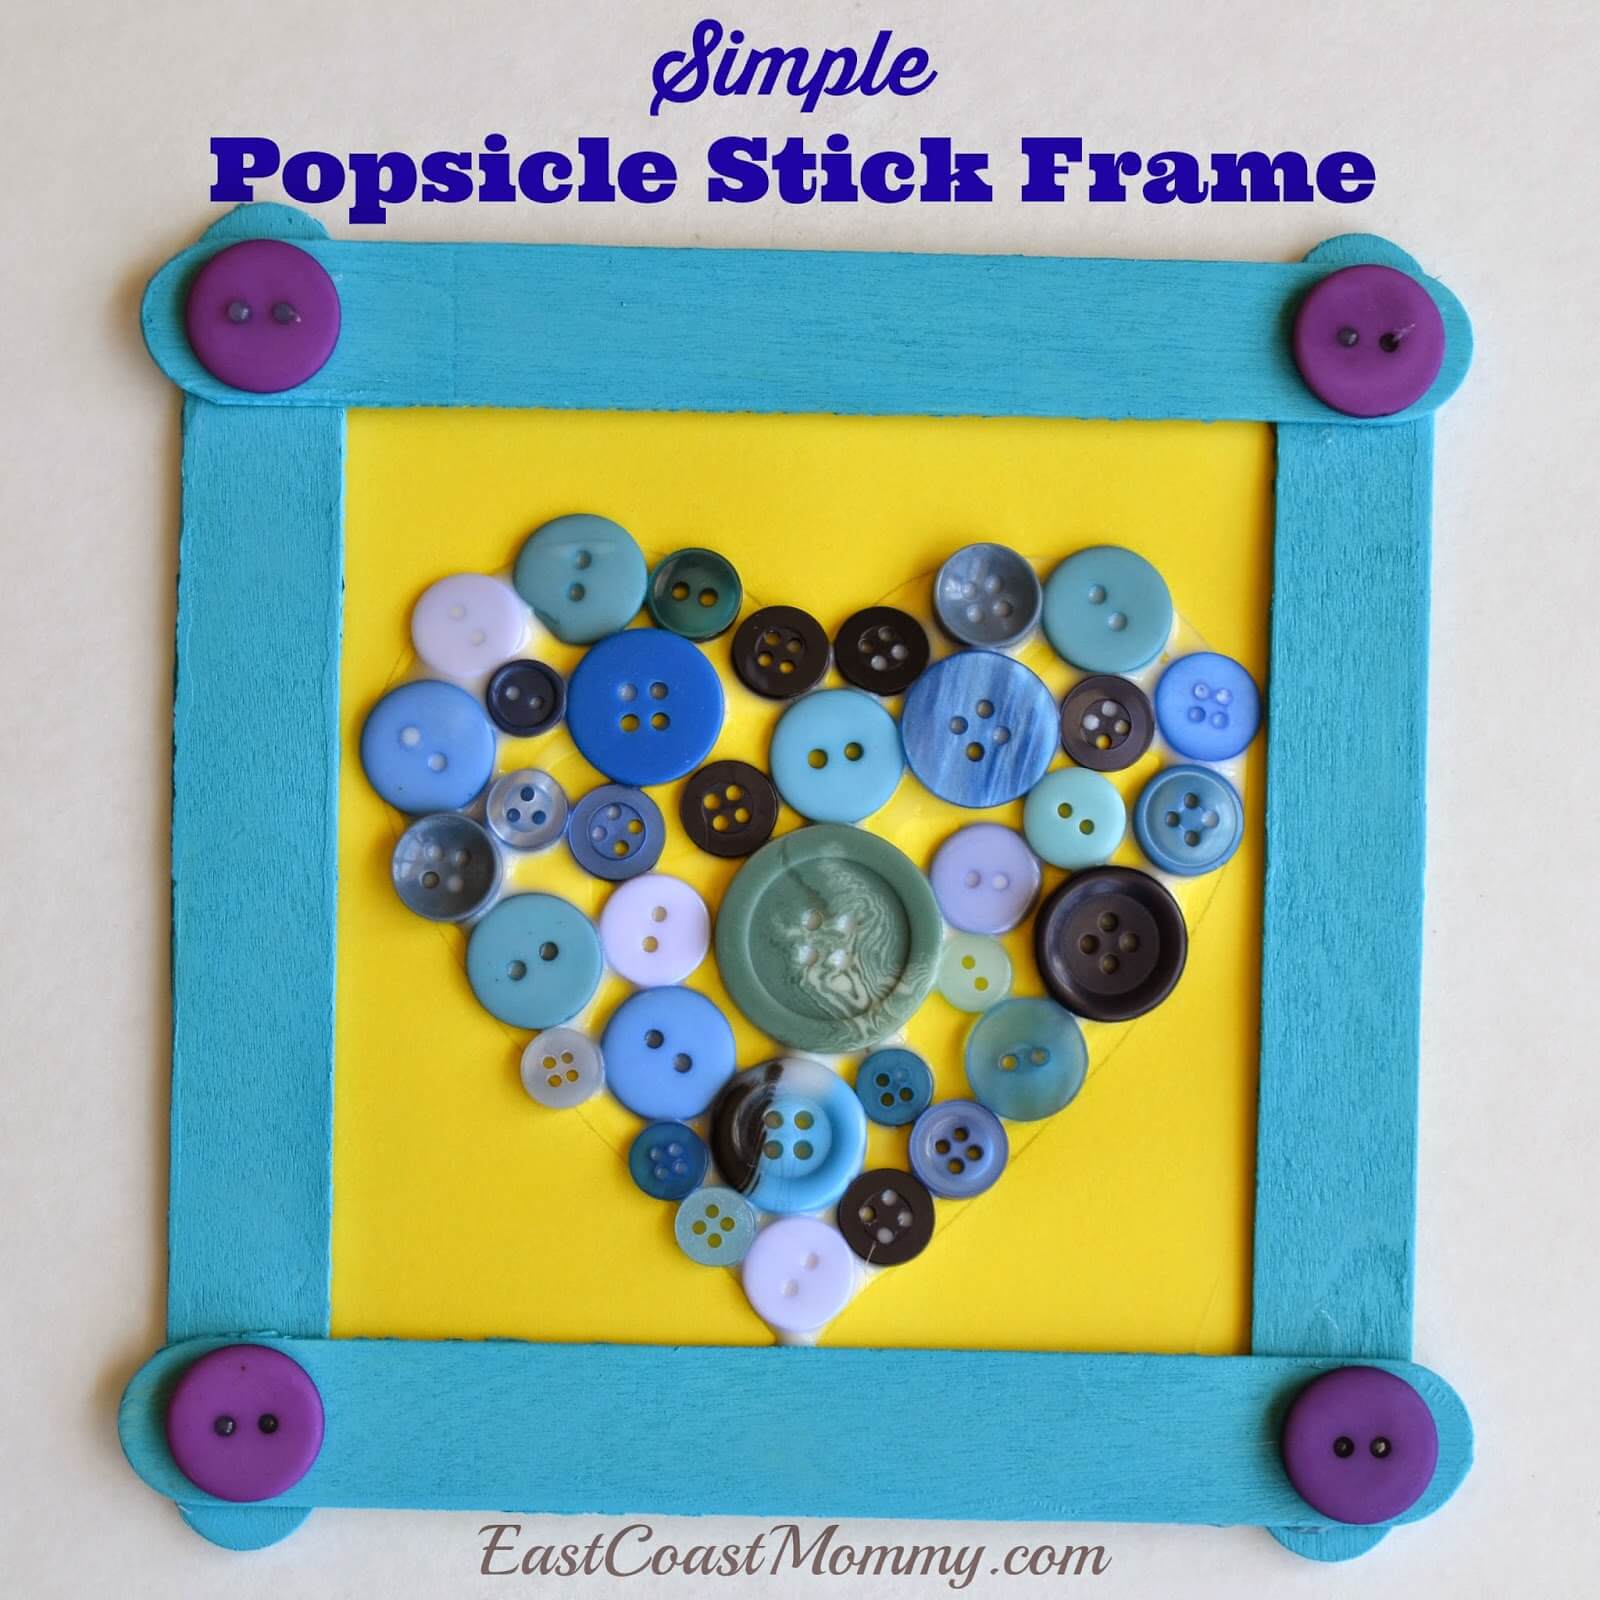 Super Simple Popsicle Stick Frame Craft With Button Heart Button Photo Frame Crafts